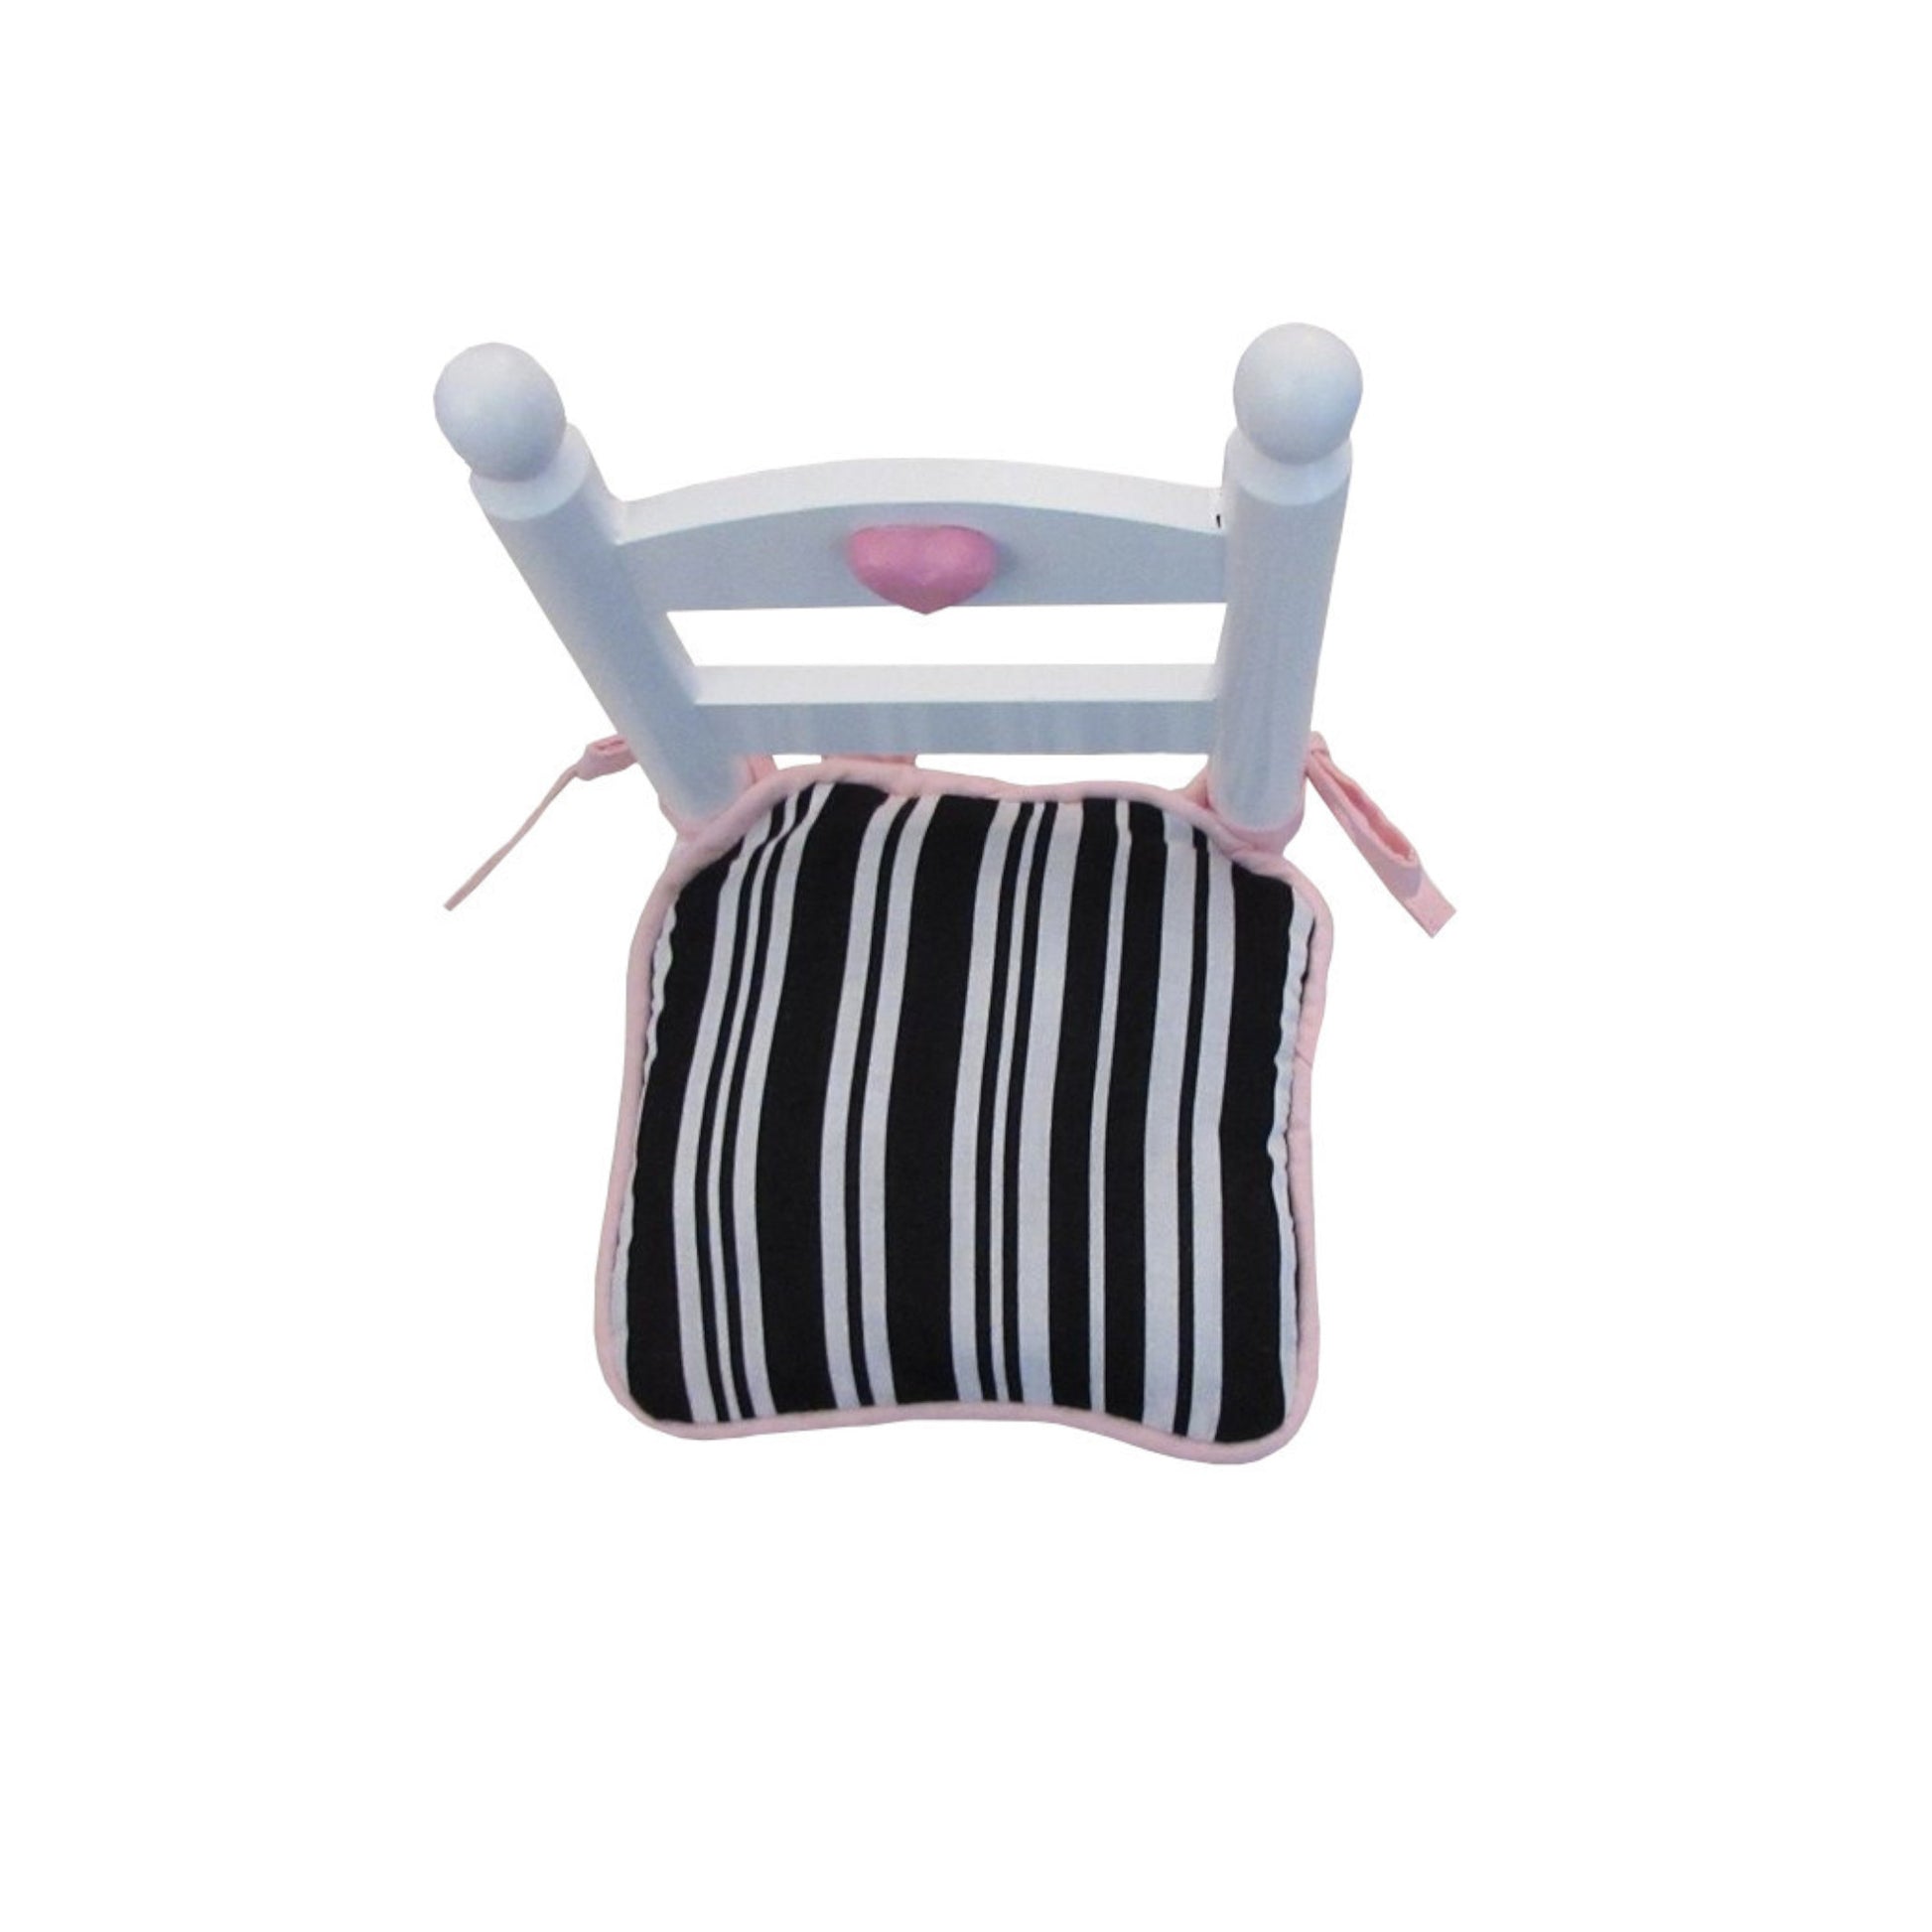 Black and White Stripe Doll Chair Cushion for 18-inch dolls Second view